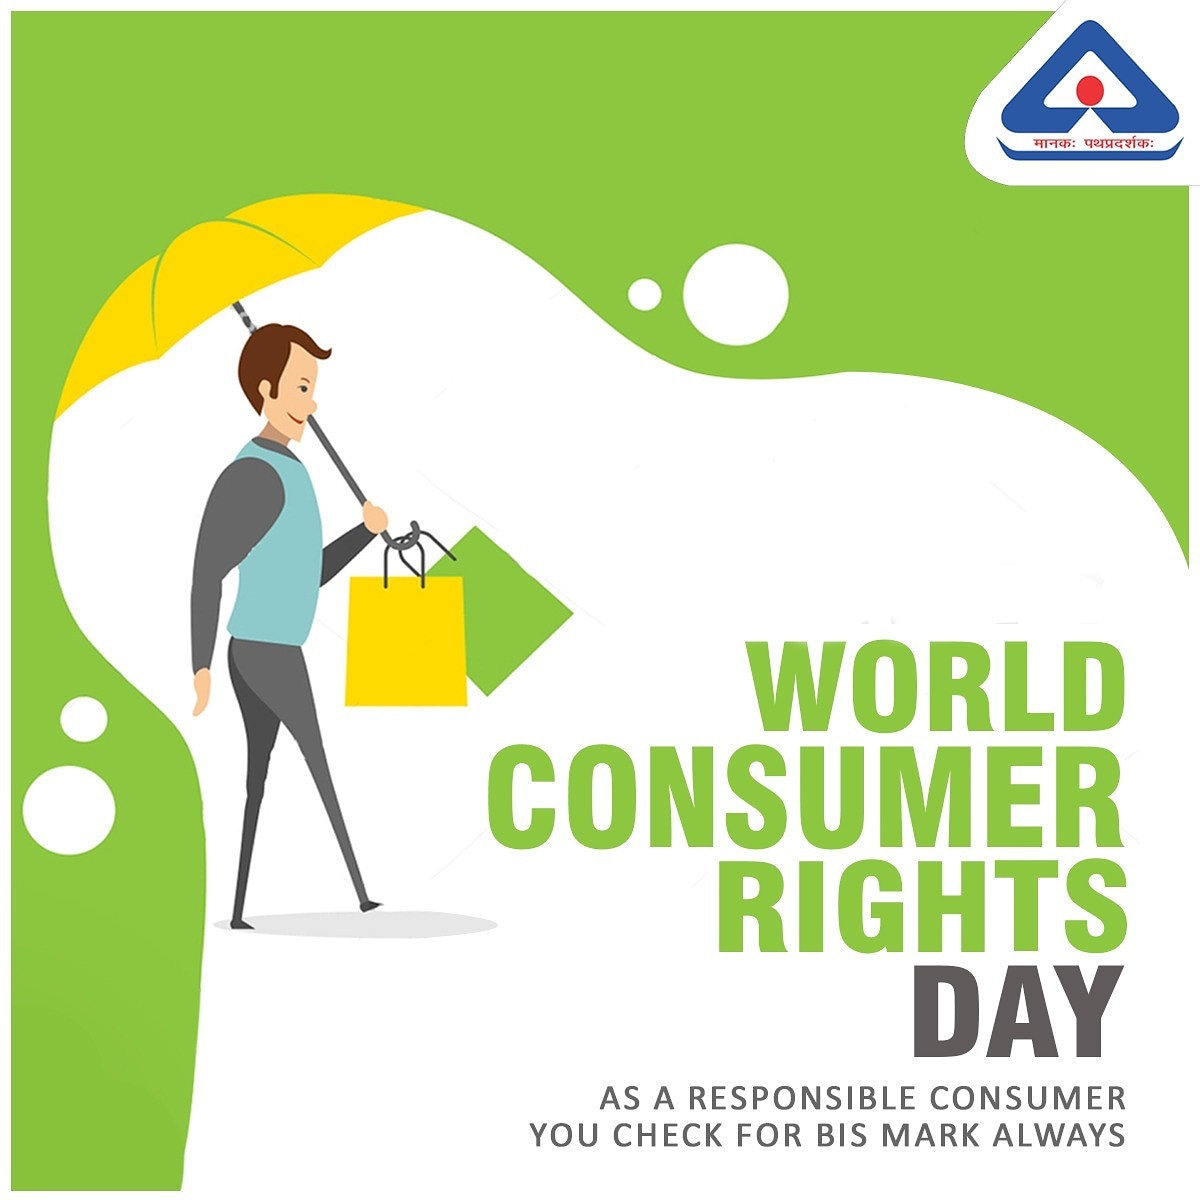 towards Protection of Consumer Rights and Consumer Empowerment. (2/2)
#ISIMarkAlways
#BISAlways

@IndianStandards

@BIS_AHBO

@CMOGuj

@PMOIndia